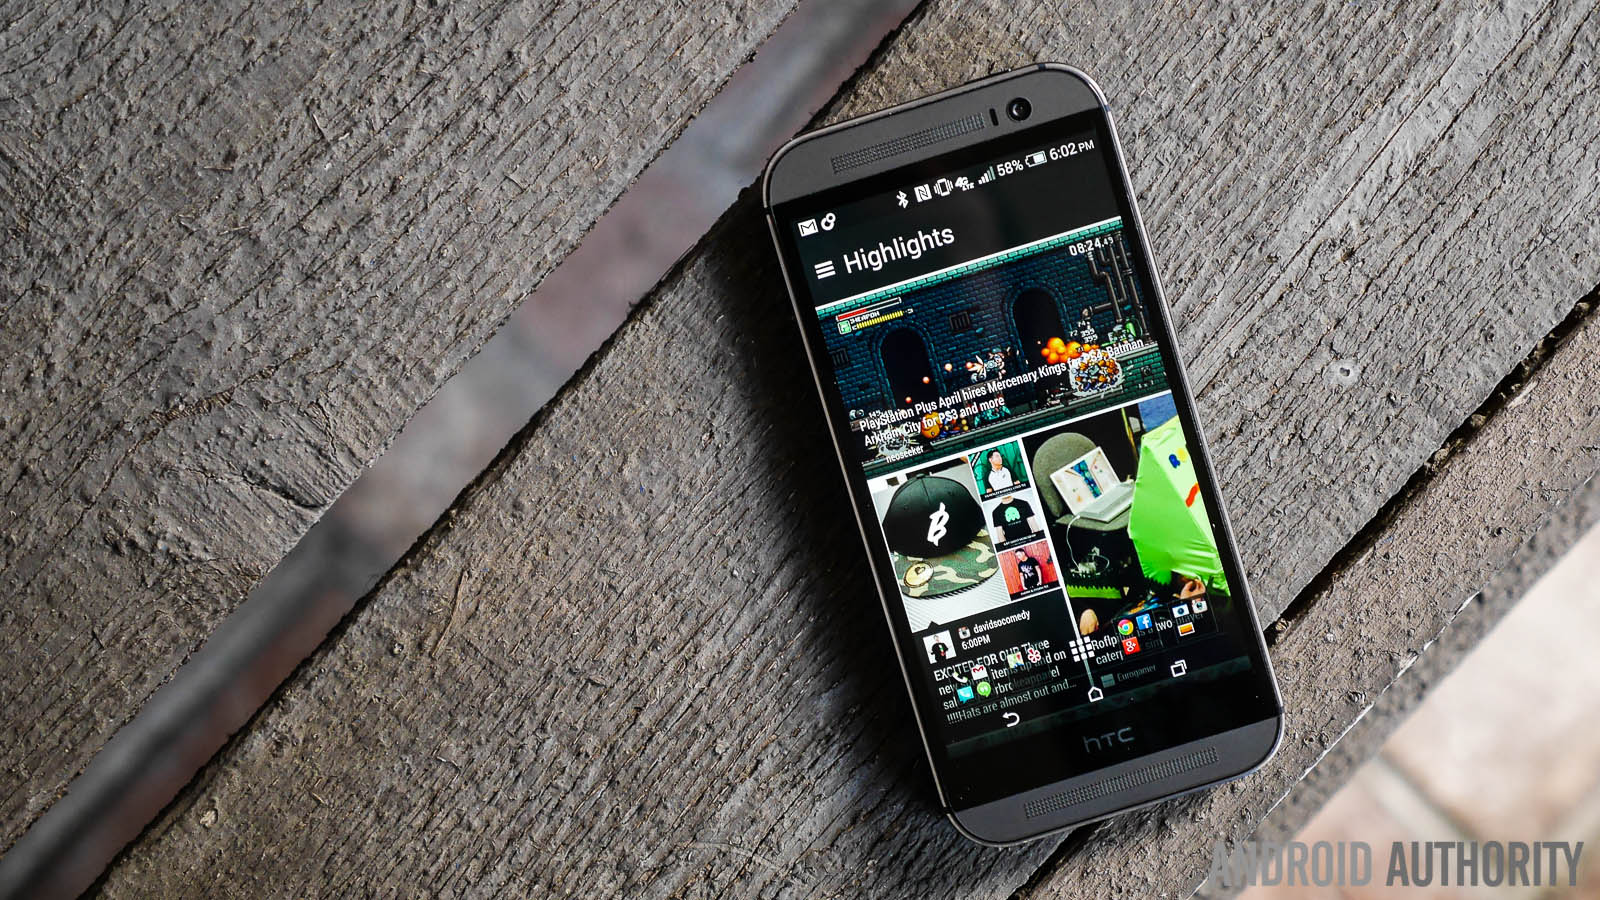 Feature Focus: What's new in BlinkFeed on the new HTCOne (M8)